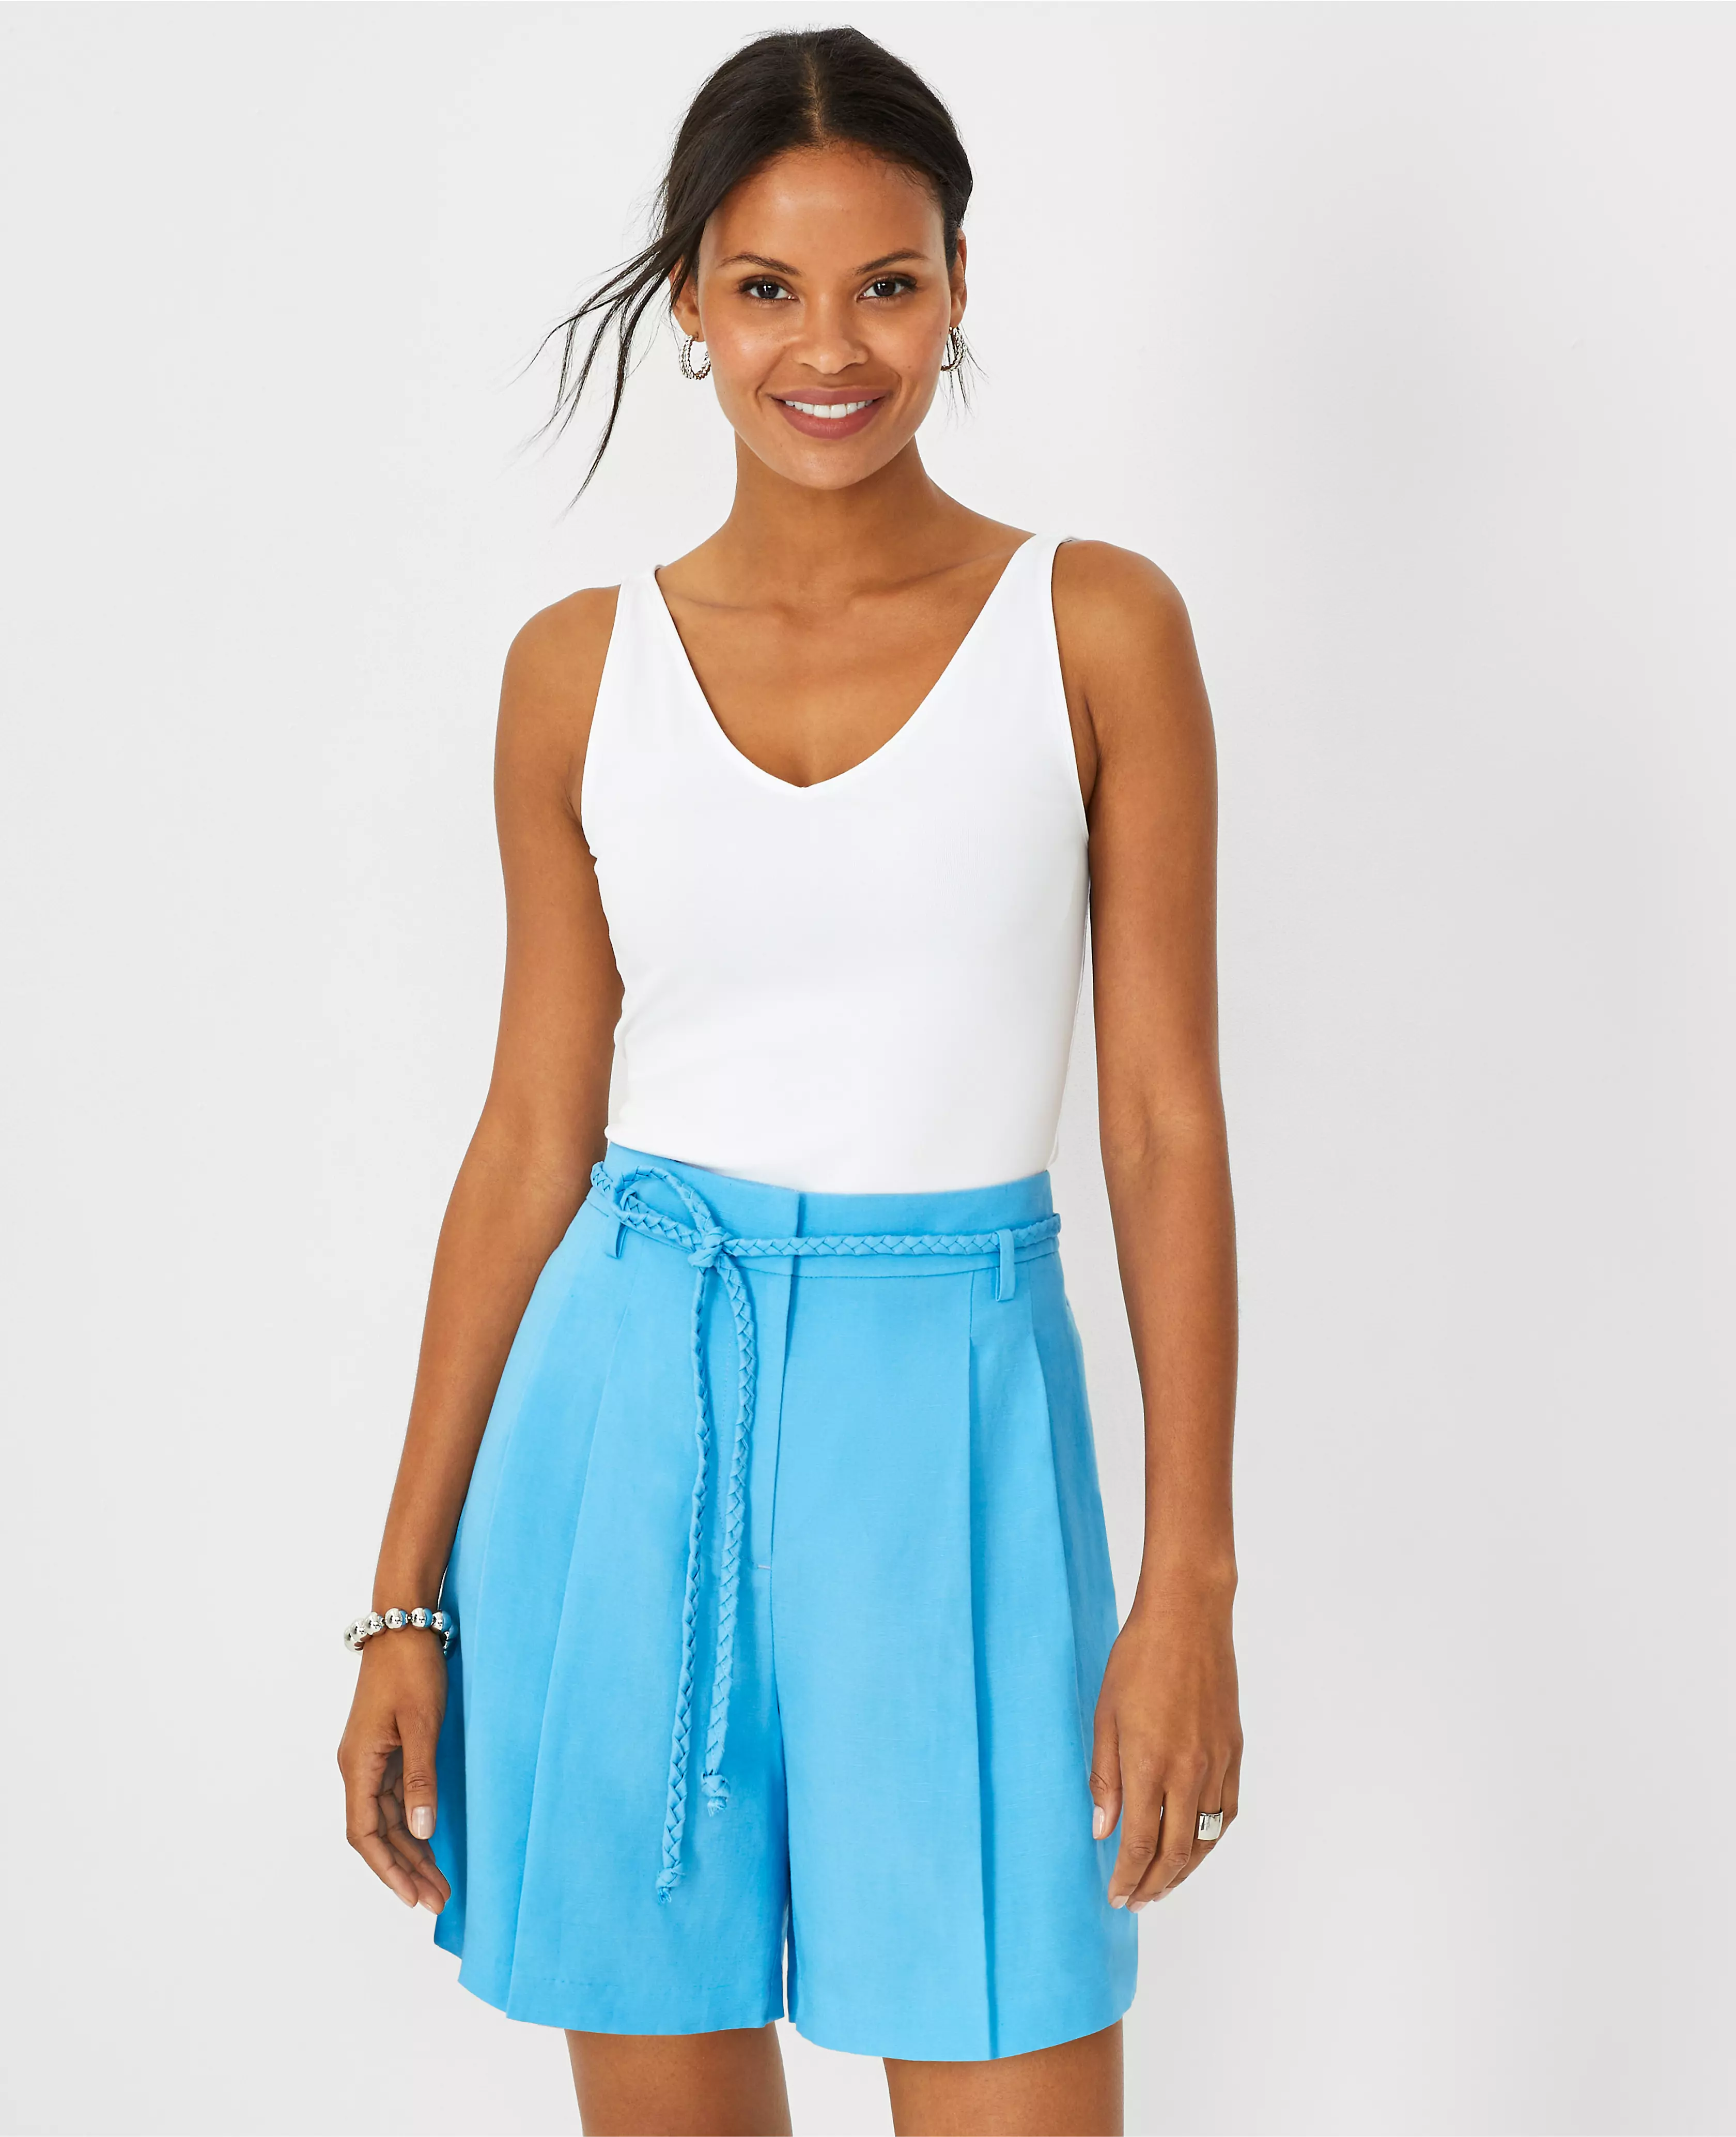 The Belted Pleated Short in Linen Blend